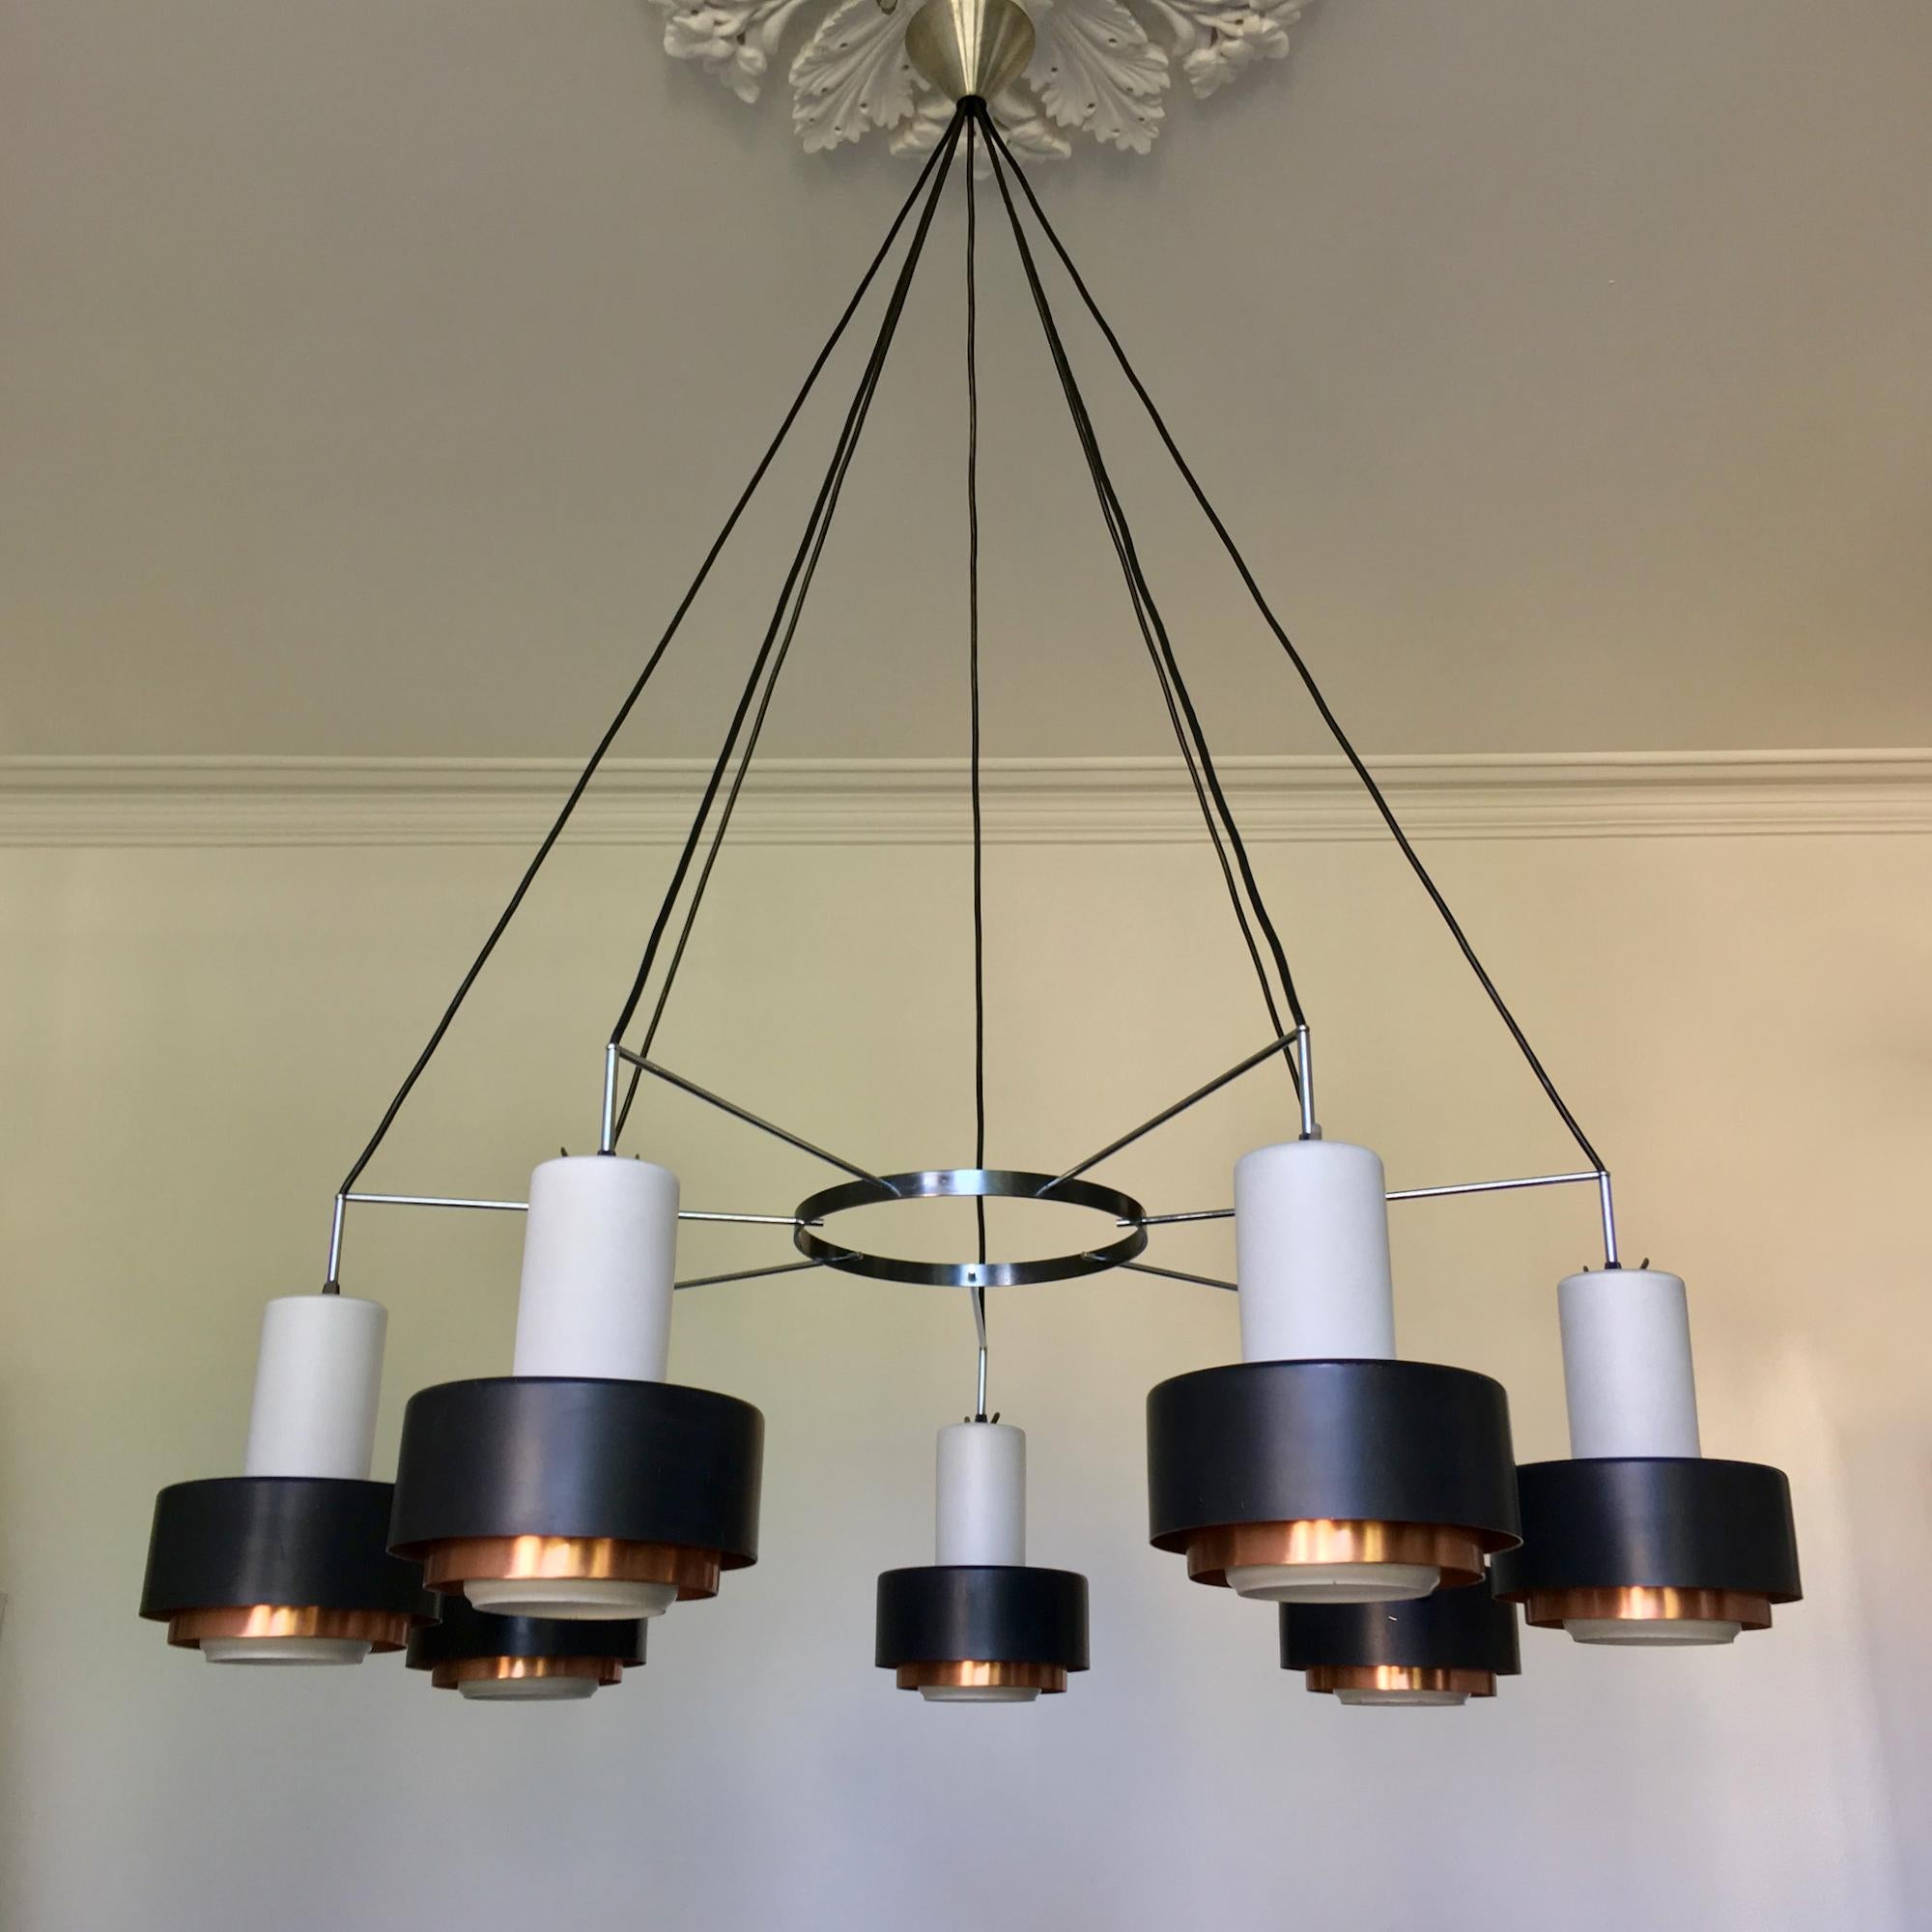 Very large and impressive Mid-Century Modern chandelier, European, circa 1960s. A striking modernist fixture from a former church, which would suit the high ceilings of a loft or barn conversion, restaurant or other tall space. Possibly a bespoke